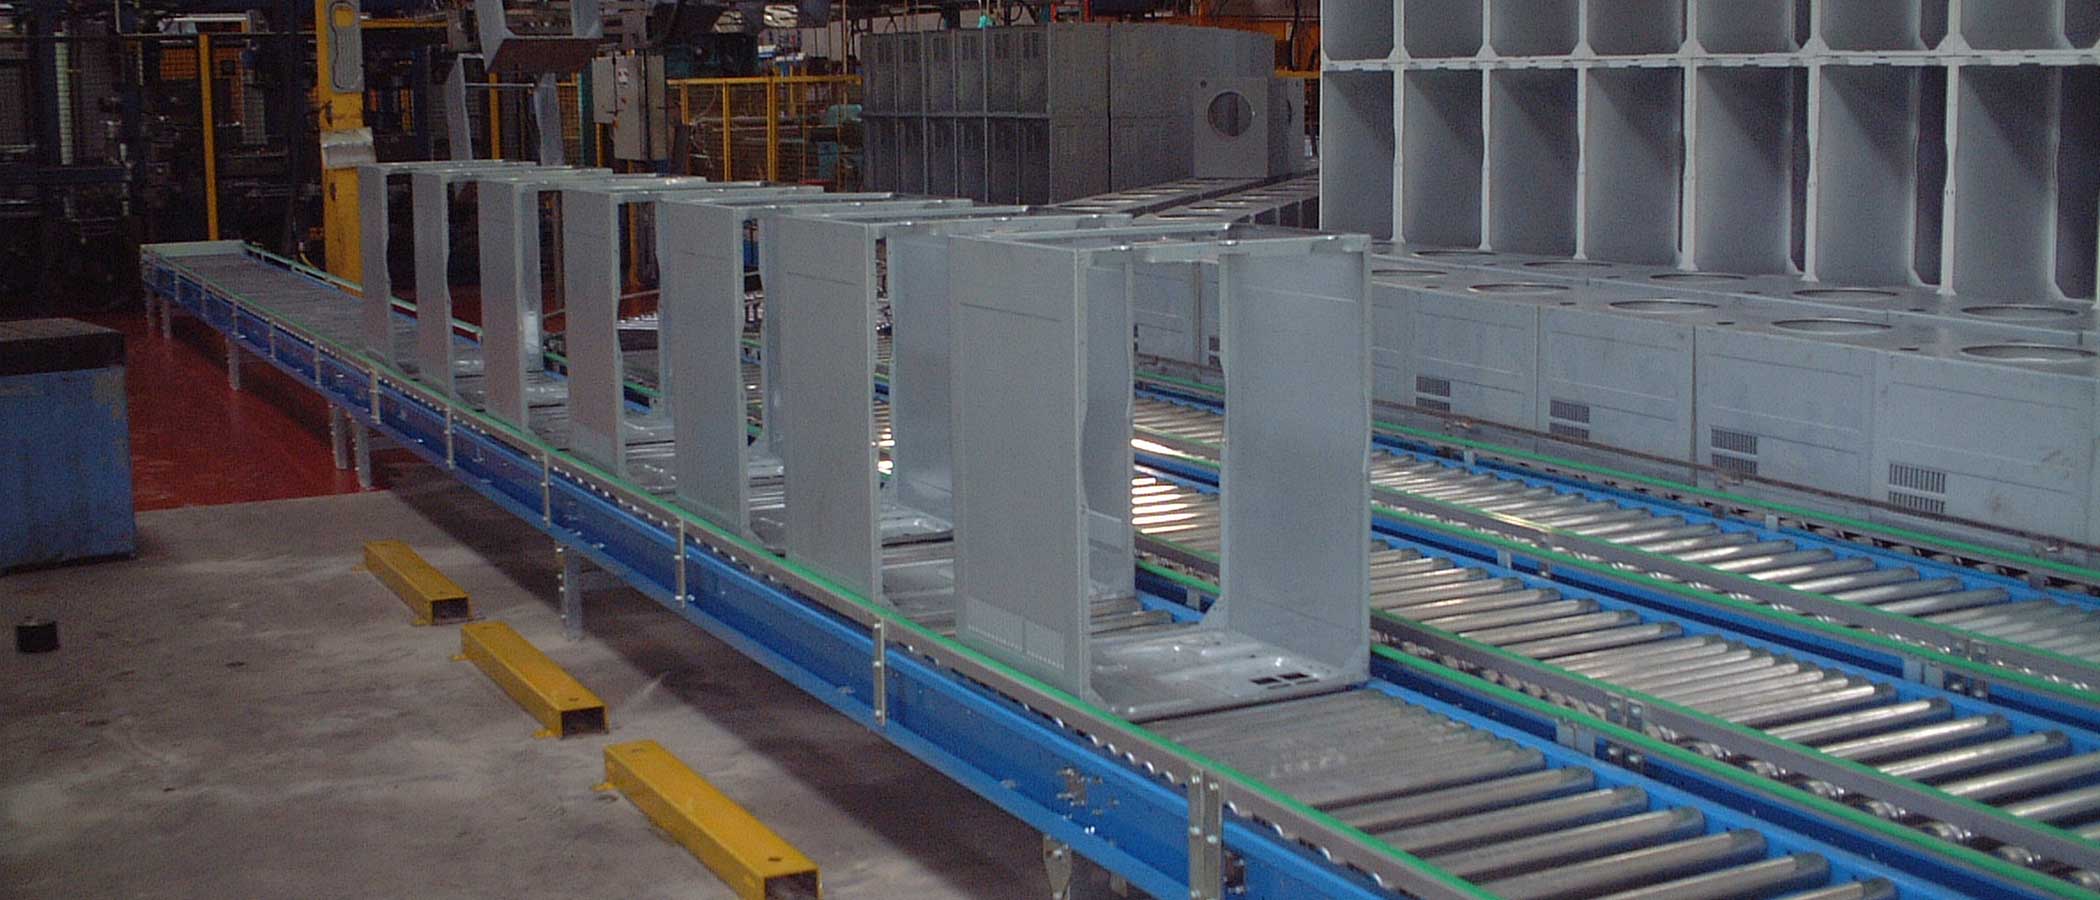  Unit Load and Pallet Conveyor Systems